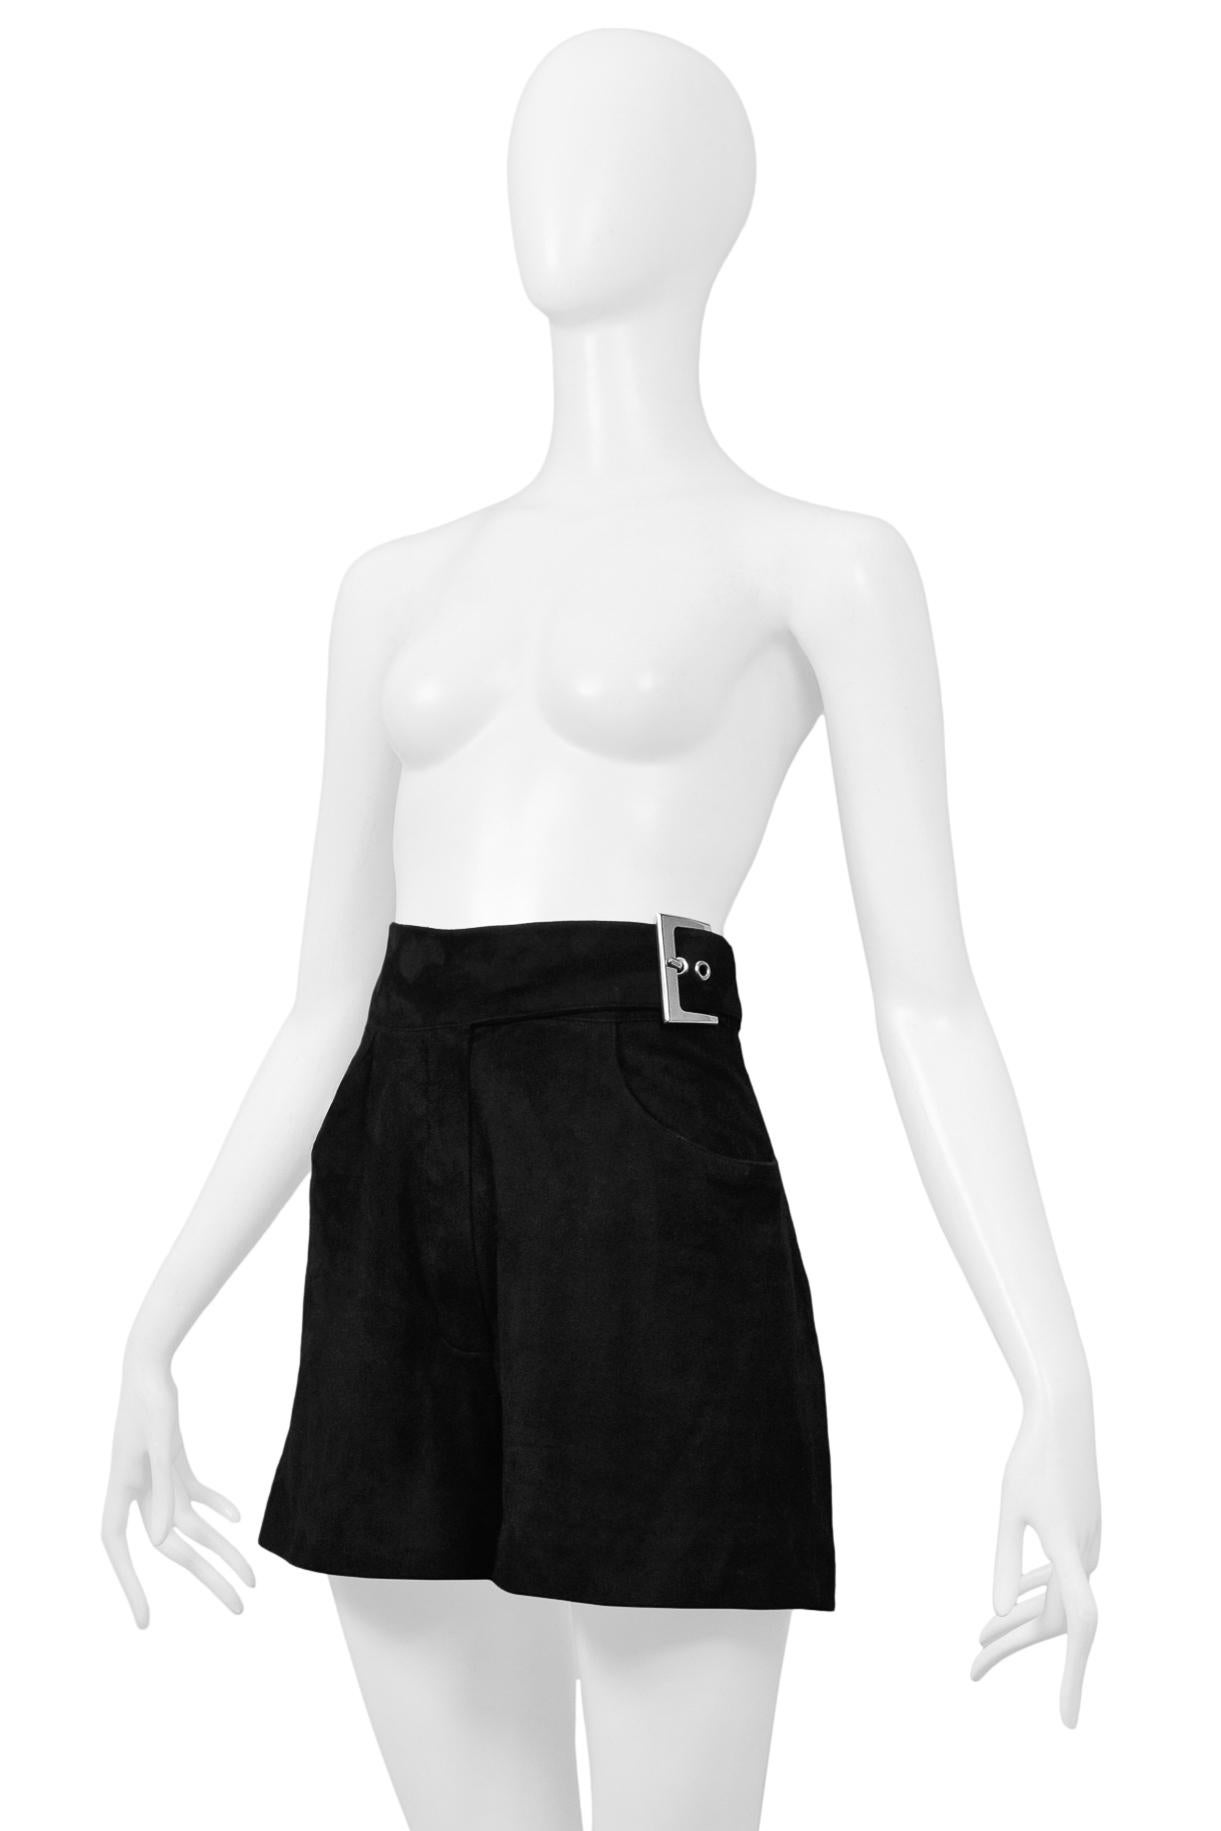 Women's Claude Montana Black Suede Belted Shorts With Silver Buckle For Sale